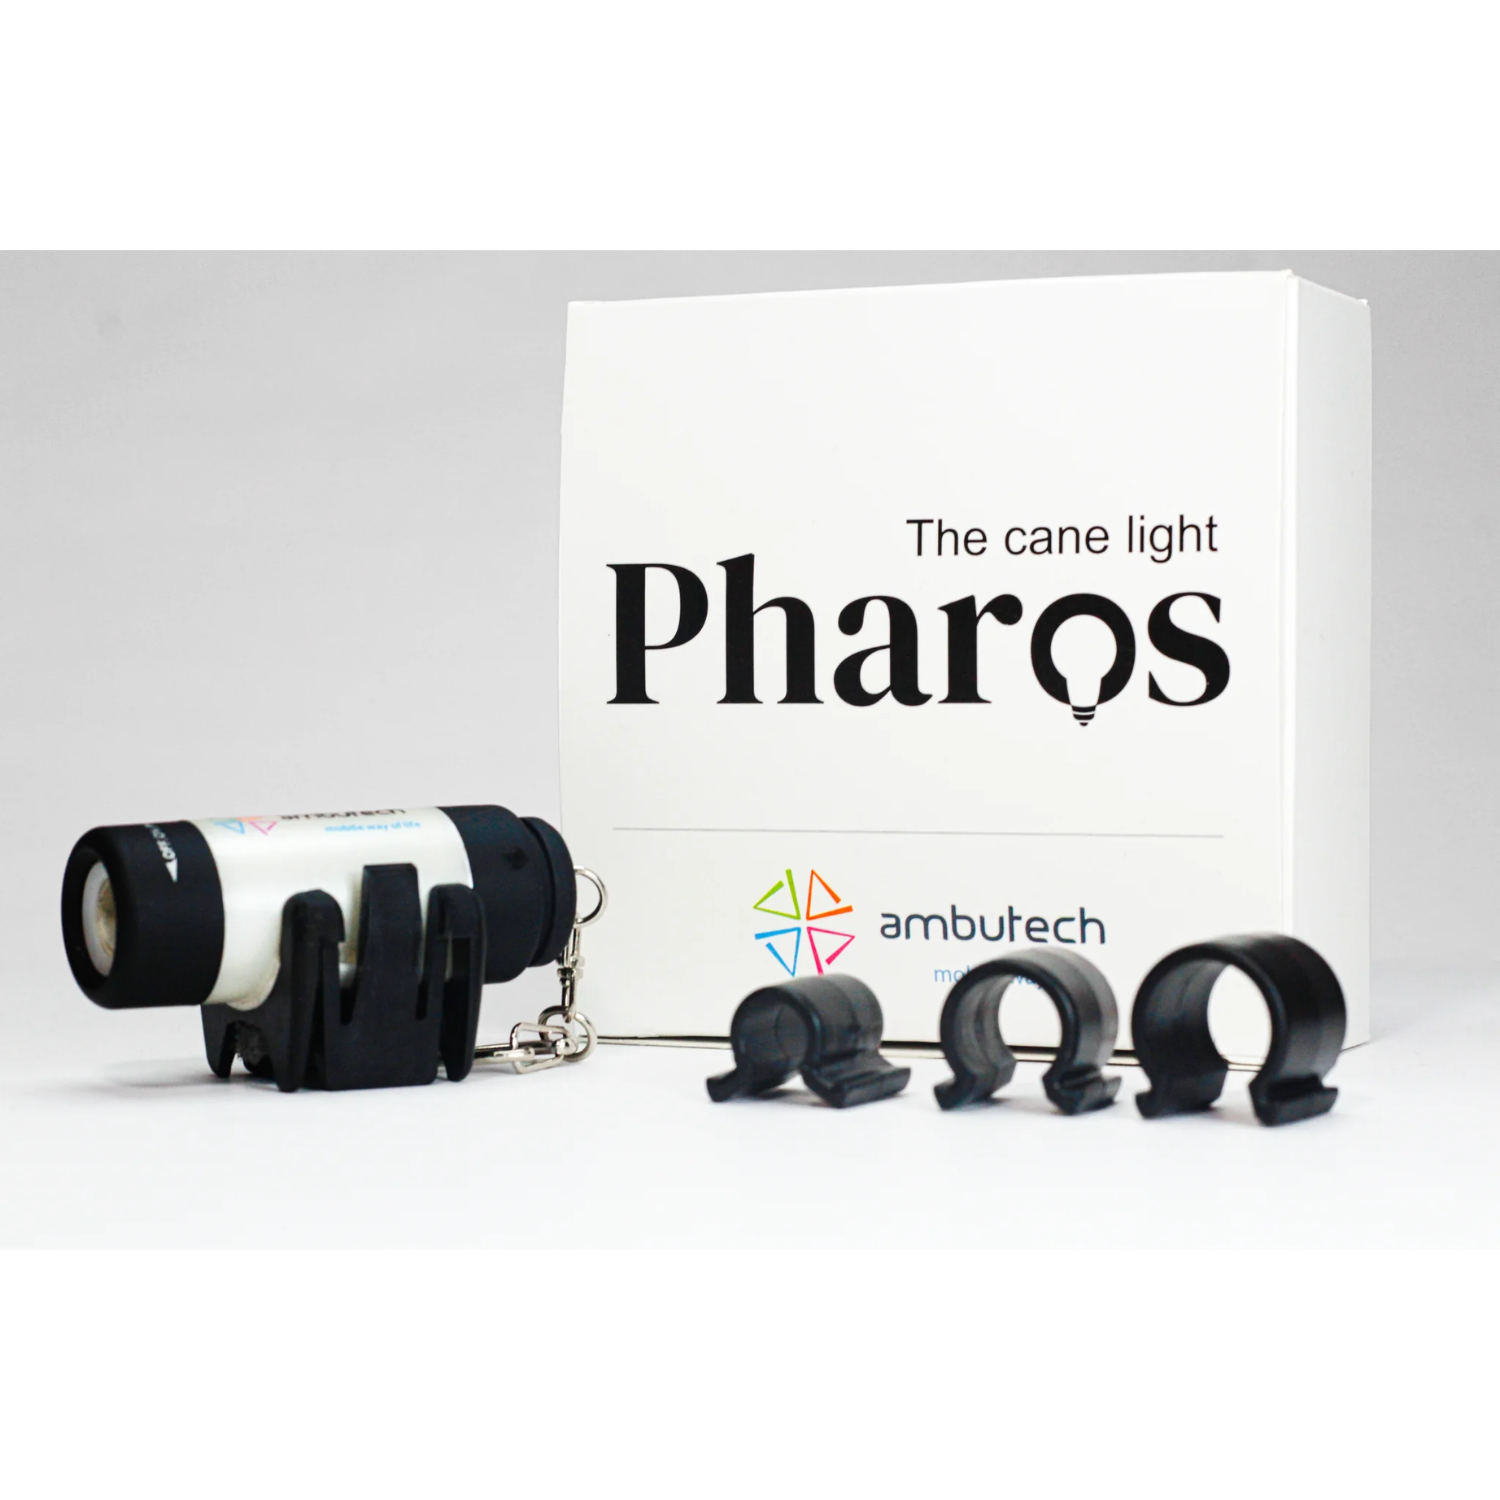 Image of Phanos Cane Light with mounting brackets from Ambutech